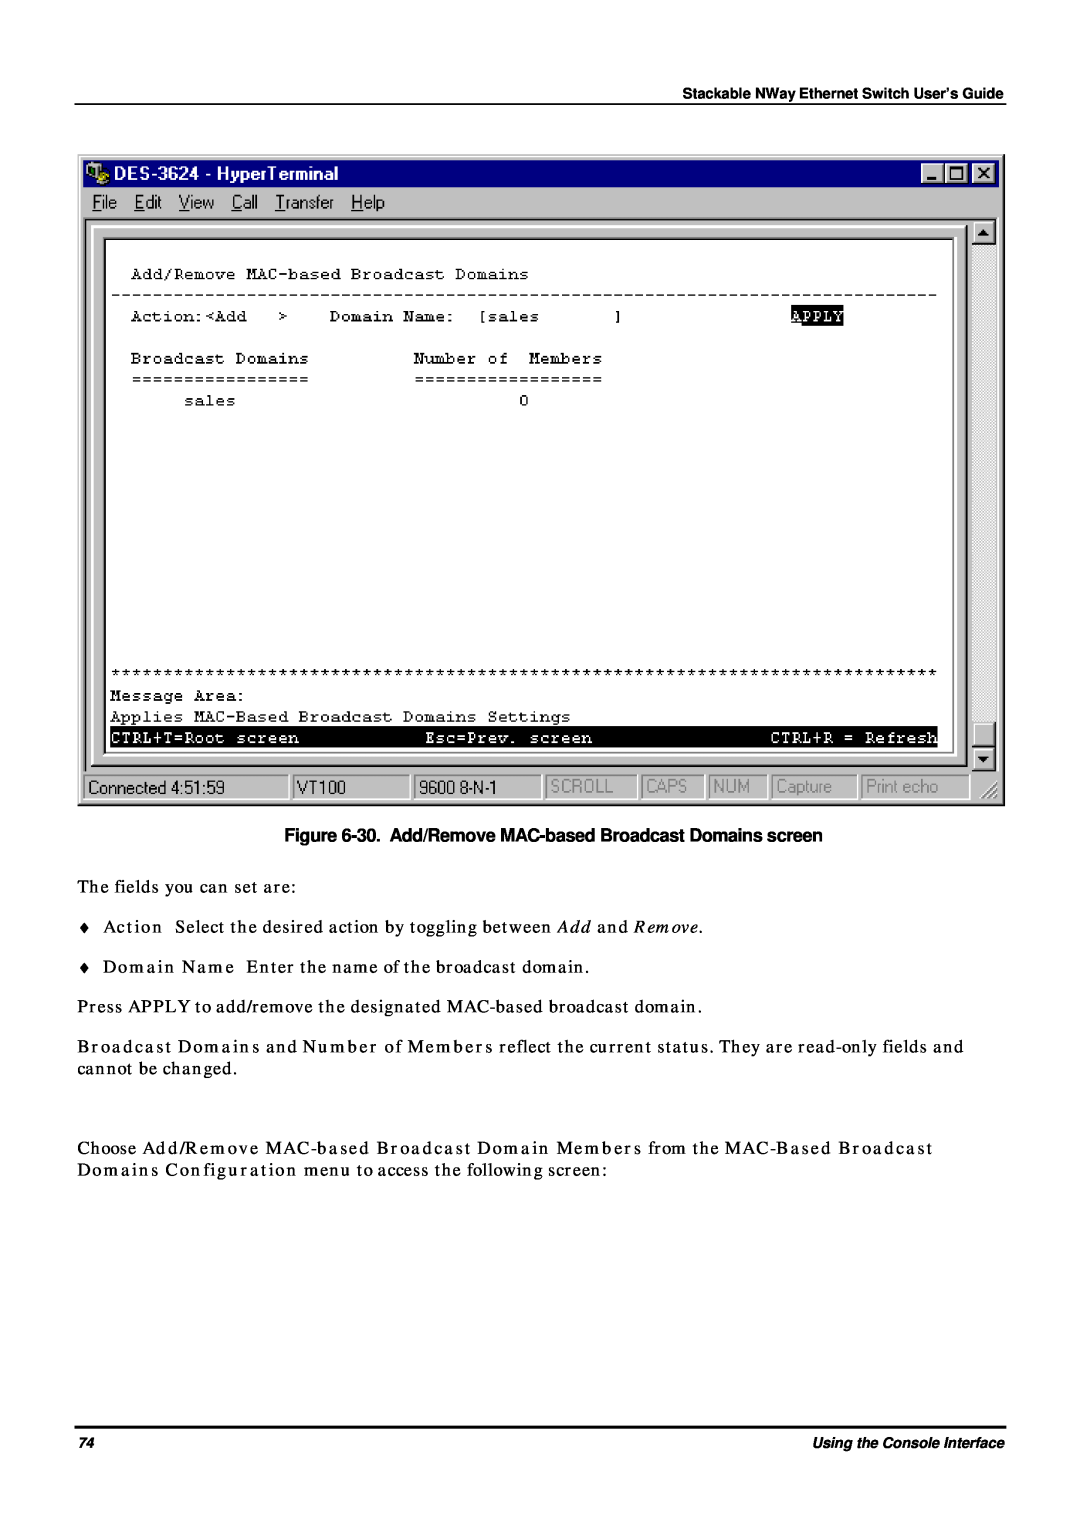 D-Link DES-3624 manual 30. Add/Remove MAC-based Broadcast Domains screen 